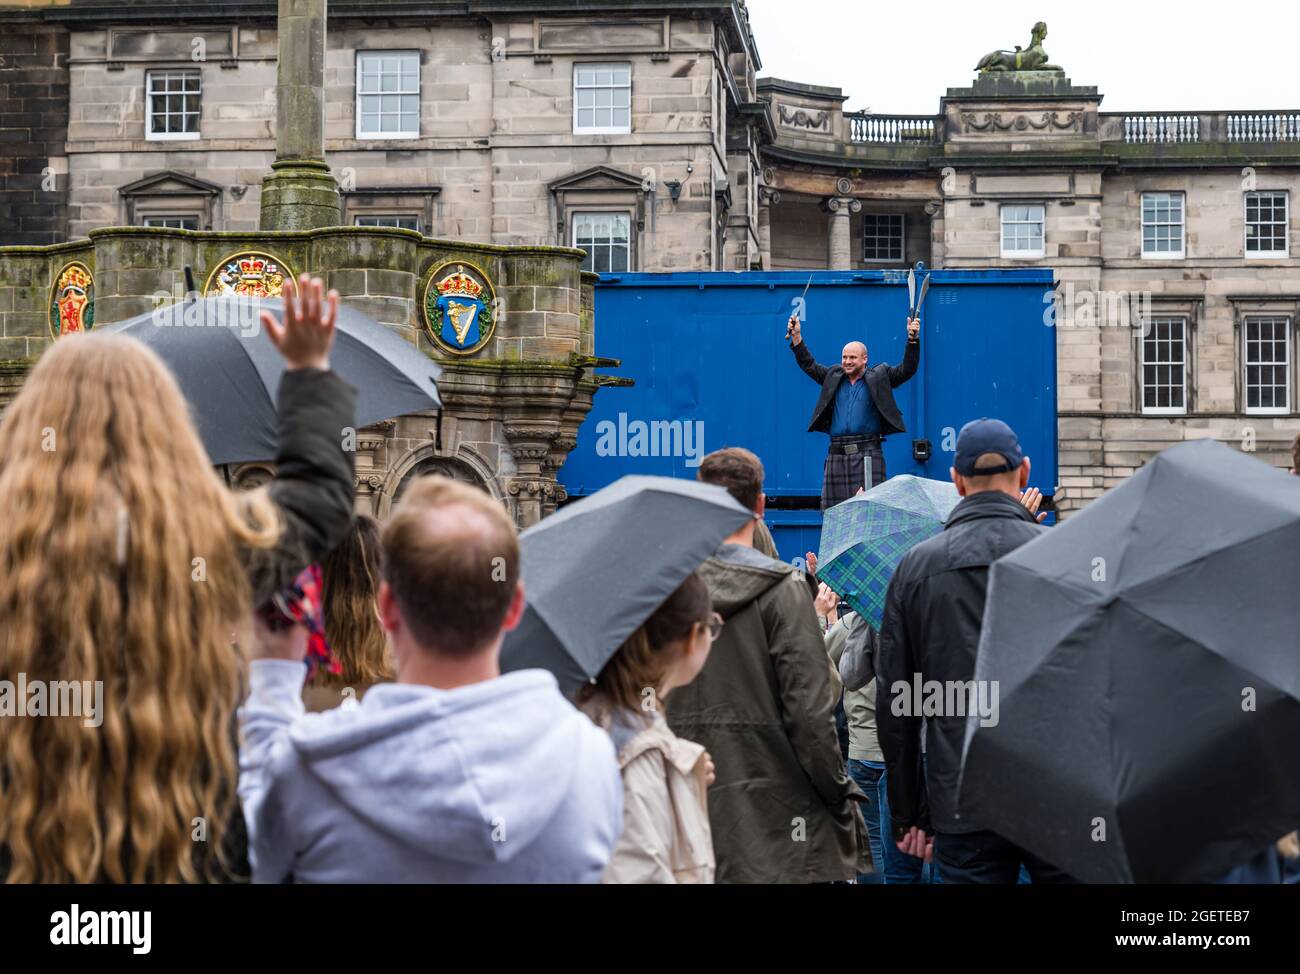 Royal Mile, Edinburgh, Scotland, United Kingdom, 21st August 2021. UK Weather: rain at Edinburgh Festival Fringe. The dreary wet weather did not deter the Fringe crowds or the street performers on a scaled back festival this Summer. A man wearing a kilt balancing on a ladder juggling machetes Stock Photo